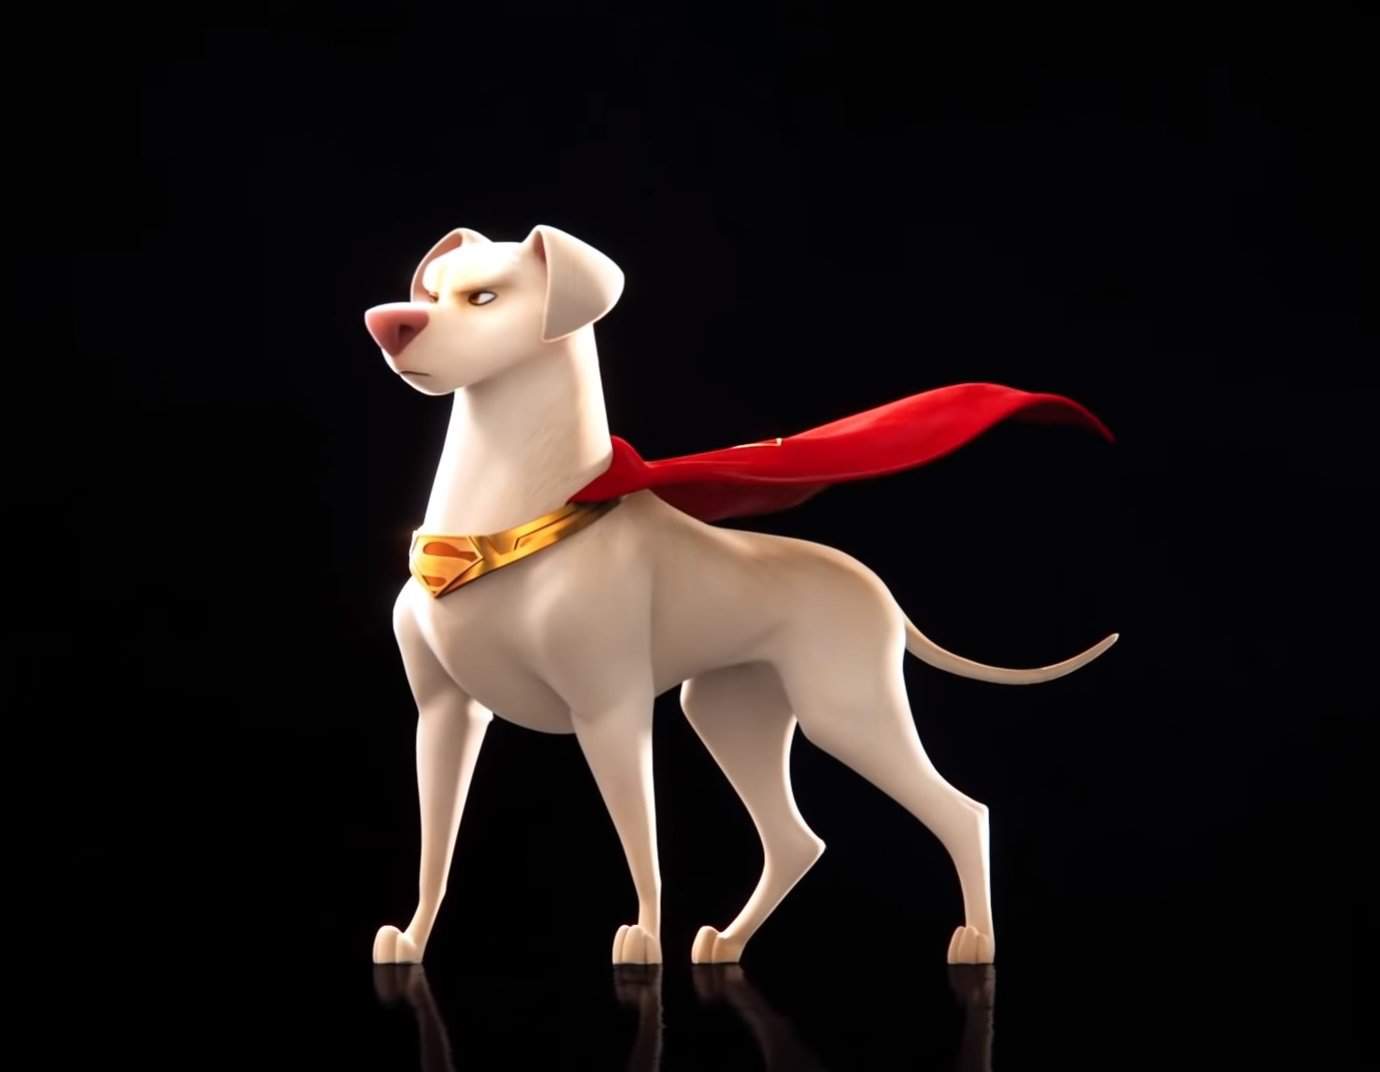 DC League of Super-Pets Trailer: Superman's Dog Gets An Animated Movie